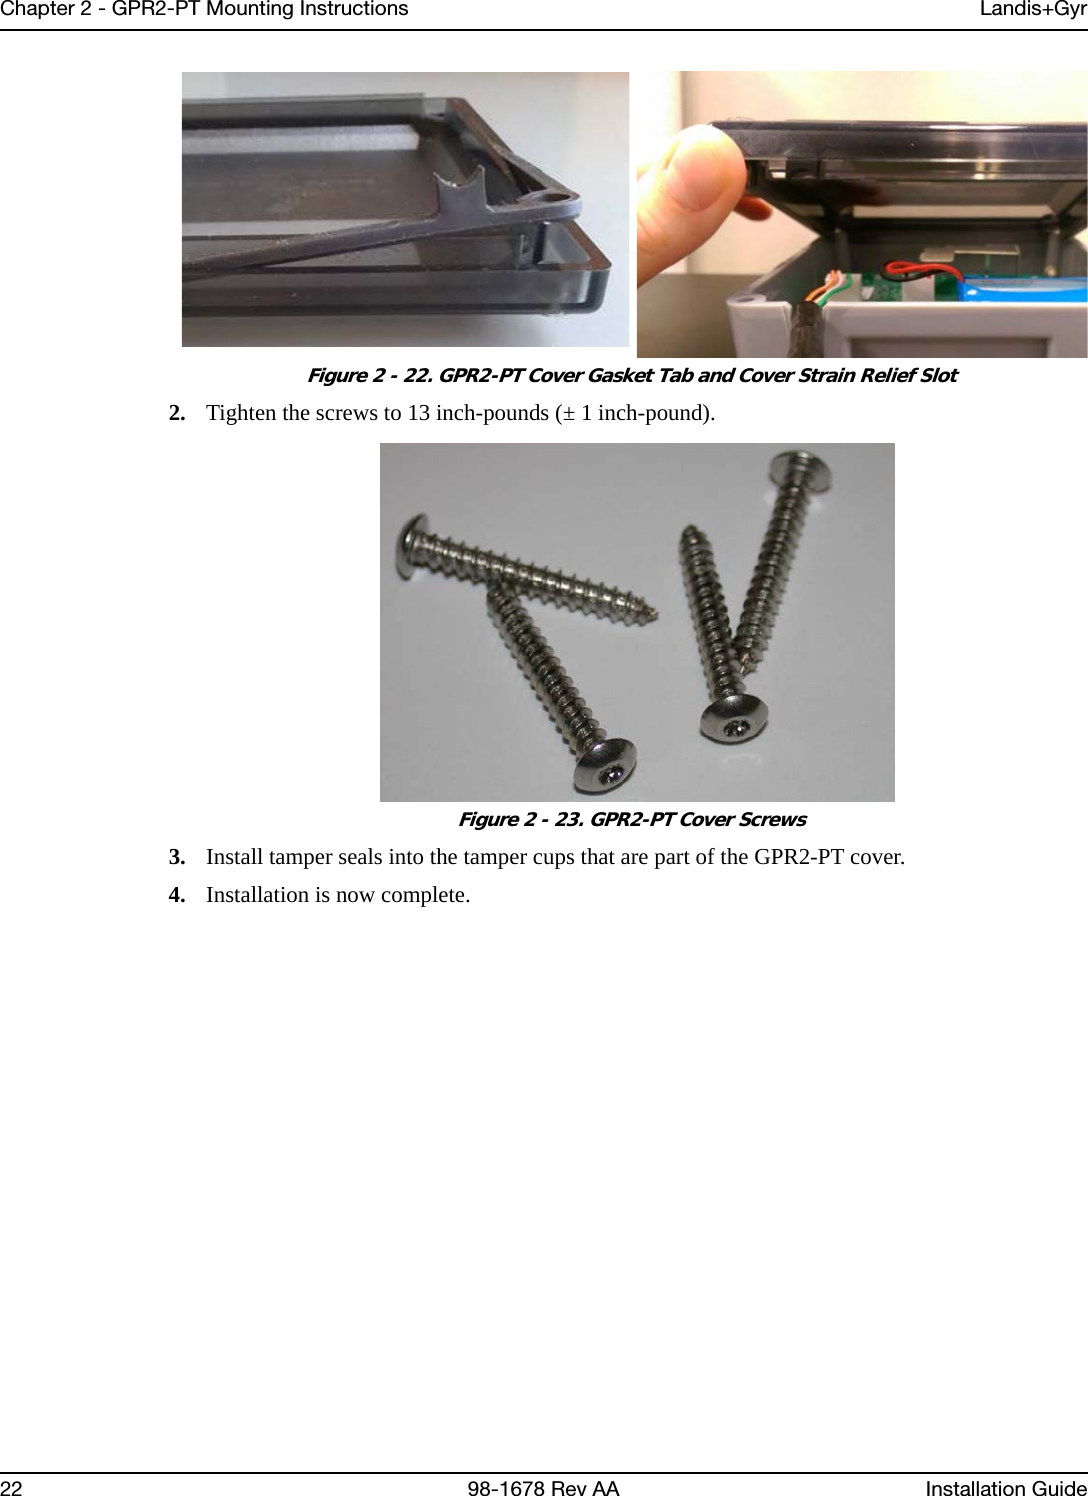 Chapter 2 - GPR2-PT Mounting Instructions Landis+Gyr22 98-1678 Rev AA Installation Guide Figure 2 - 22. GPR2-PT Cover Gasket Tab and Cover Strain Relief Slot2. Tighten the screws to 13 inch-pounds (± 1 inch-pound). Figure 2 - 23. GPR2-PT Cover Screws3. Install tamper seals into the tamper cups that are part of the GPR2-PT cover.4. Installation is now complete.